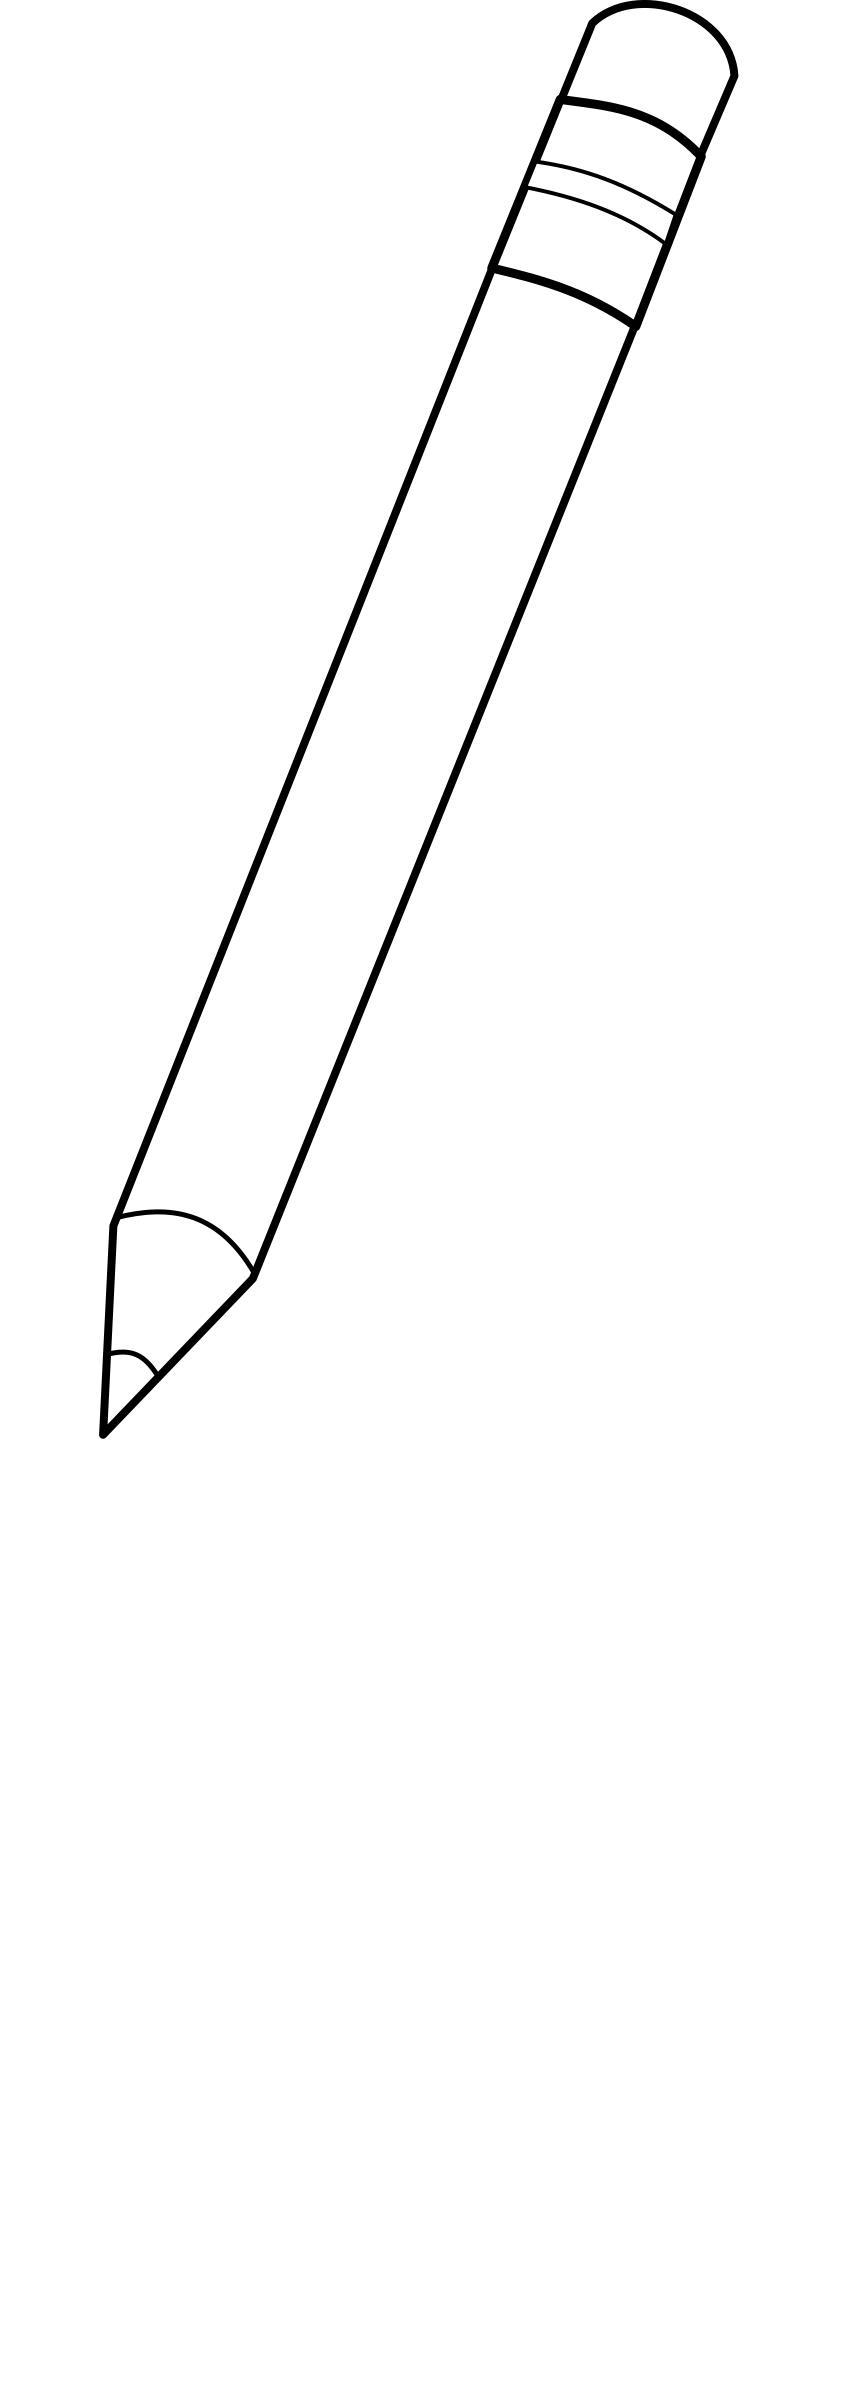 P for Pencil for coloring png transparent